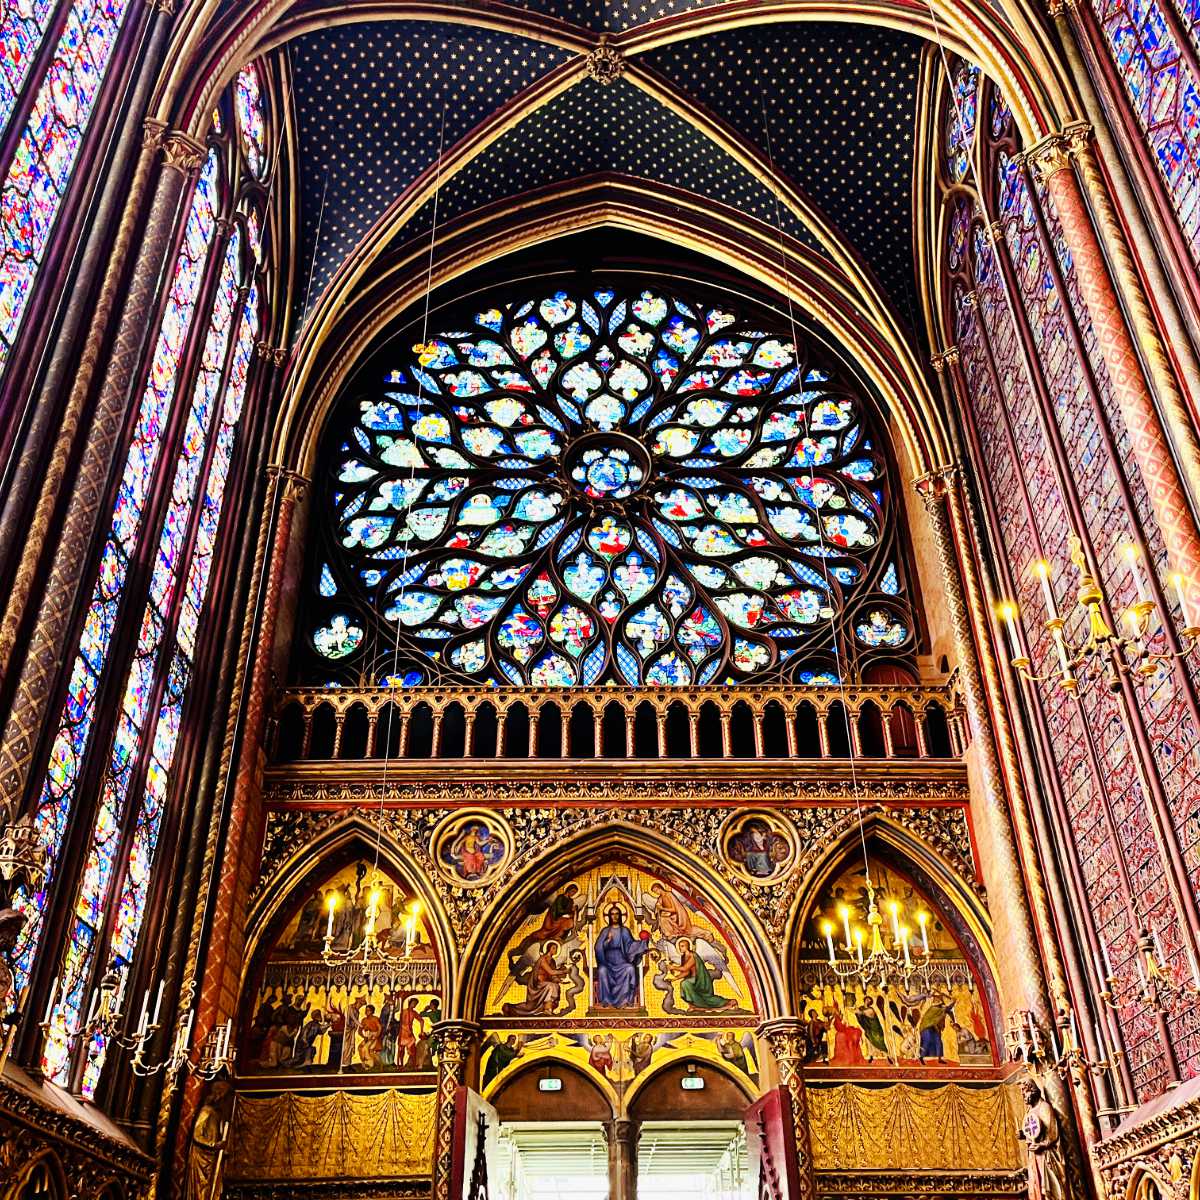 Read more about the article 11 Churches and Cathedrals in Paris worth visiting